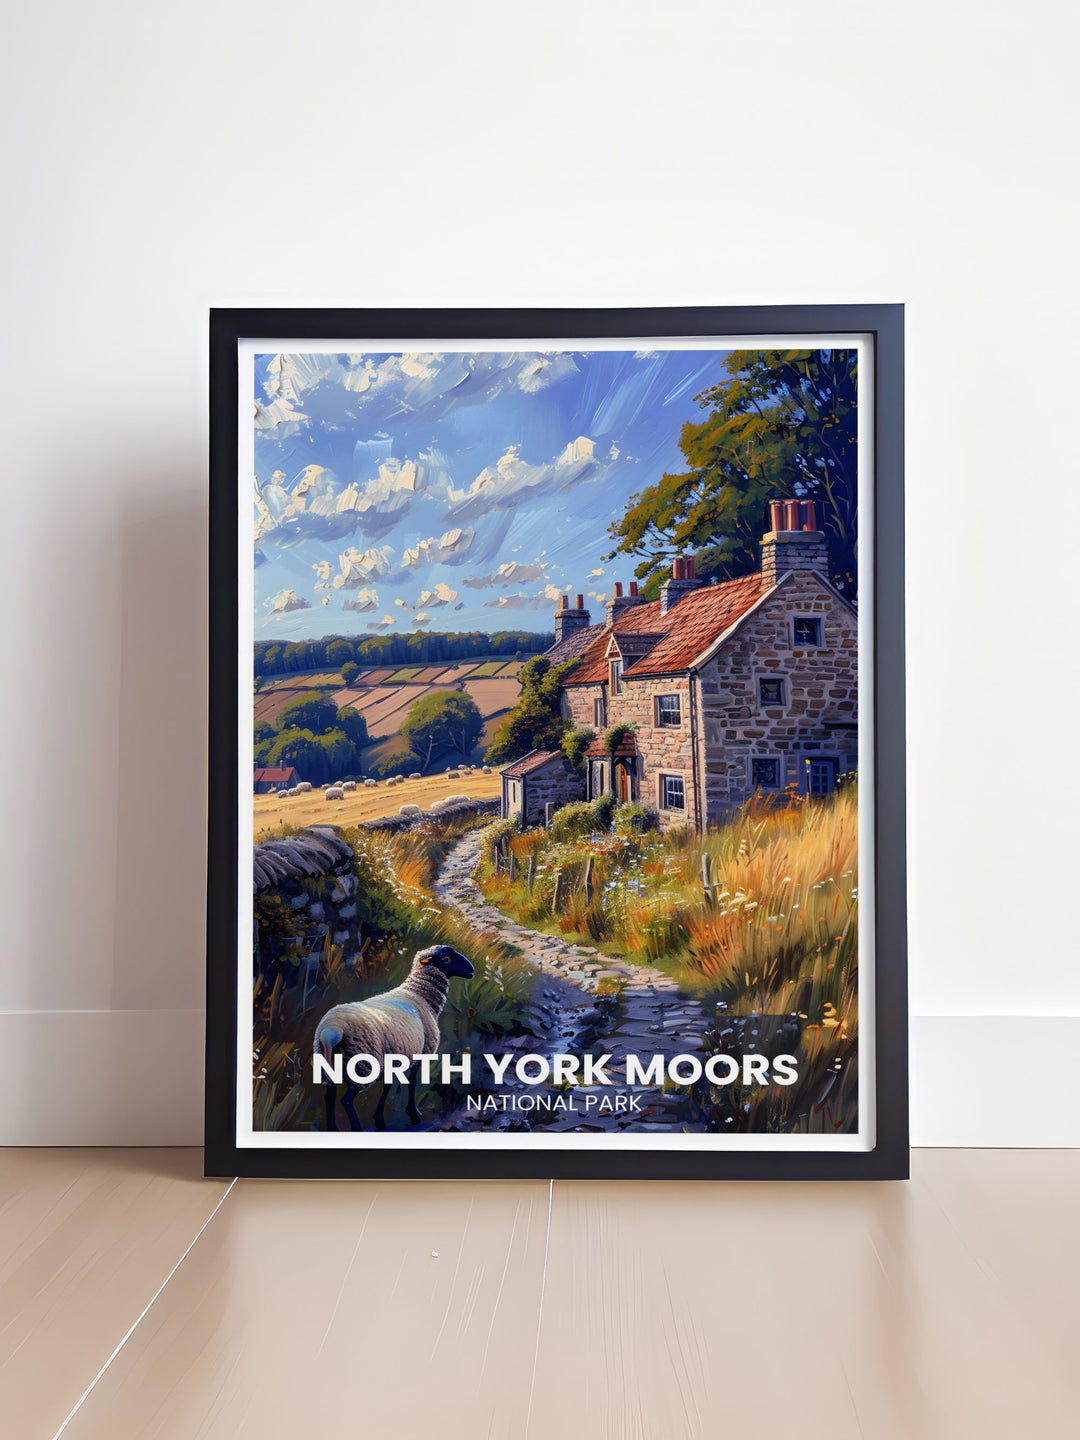 Immerse yourself in the charm of Goathland Village with this detailed art print, featuring traditional stone cottages, quaint shops, and the historic railway station that define this idyllic Yorkshire village.